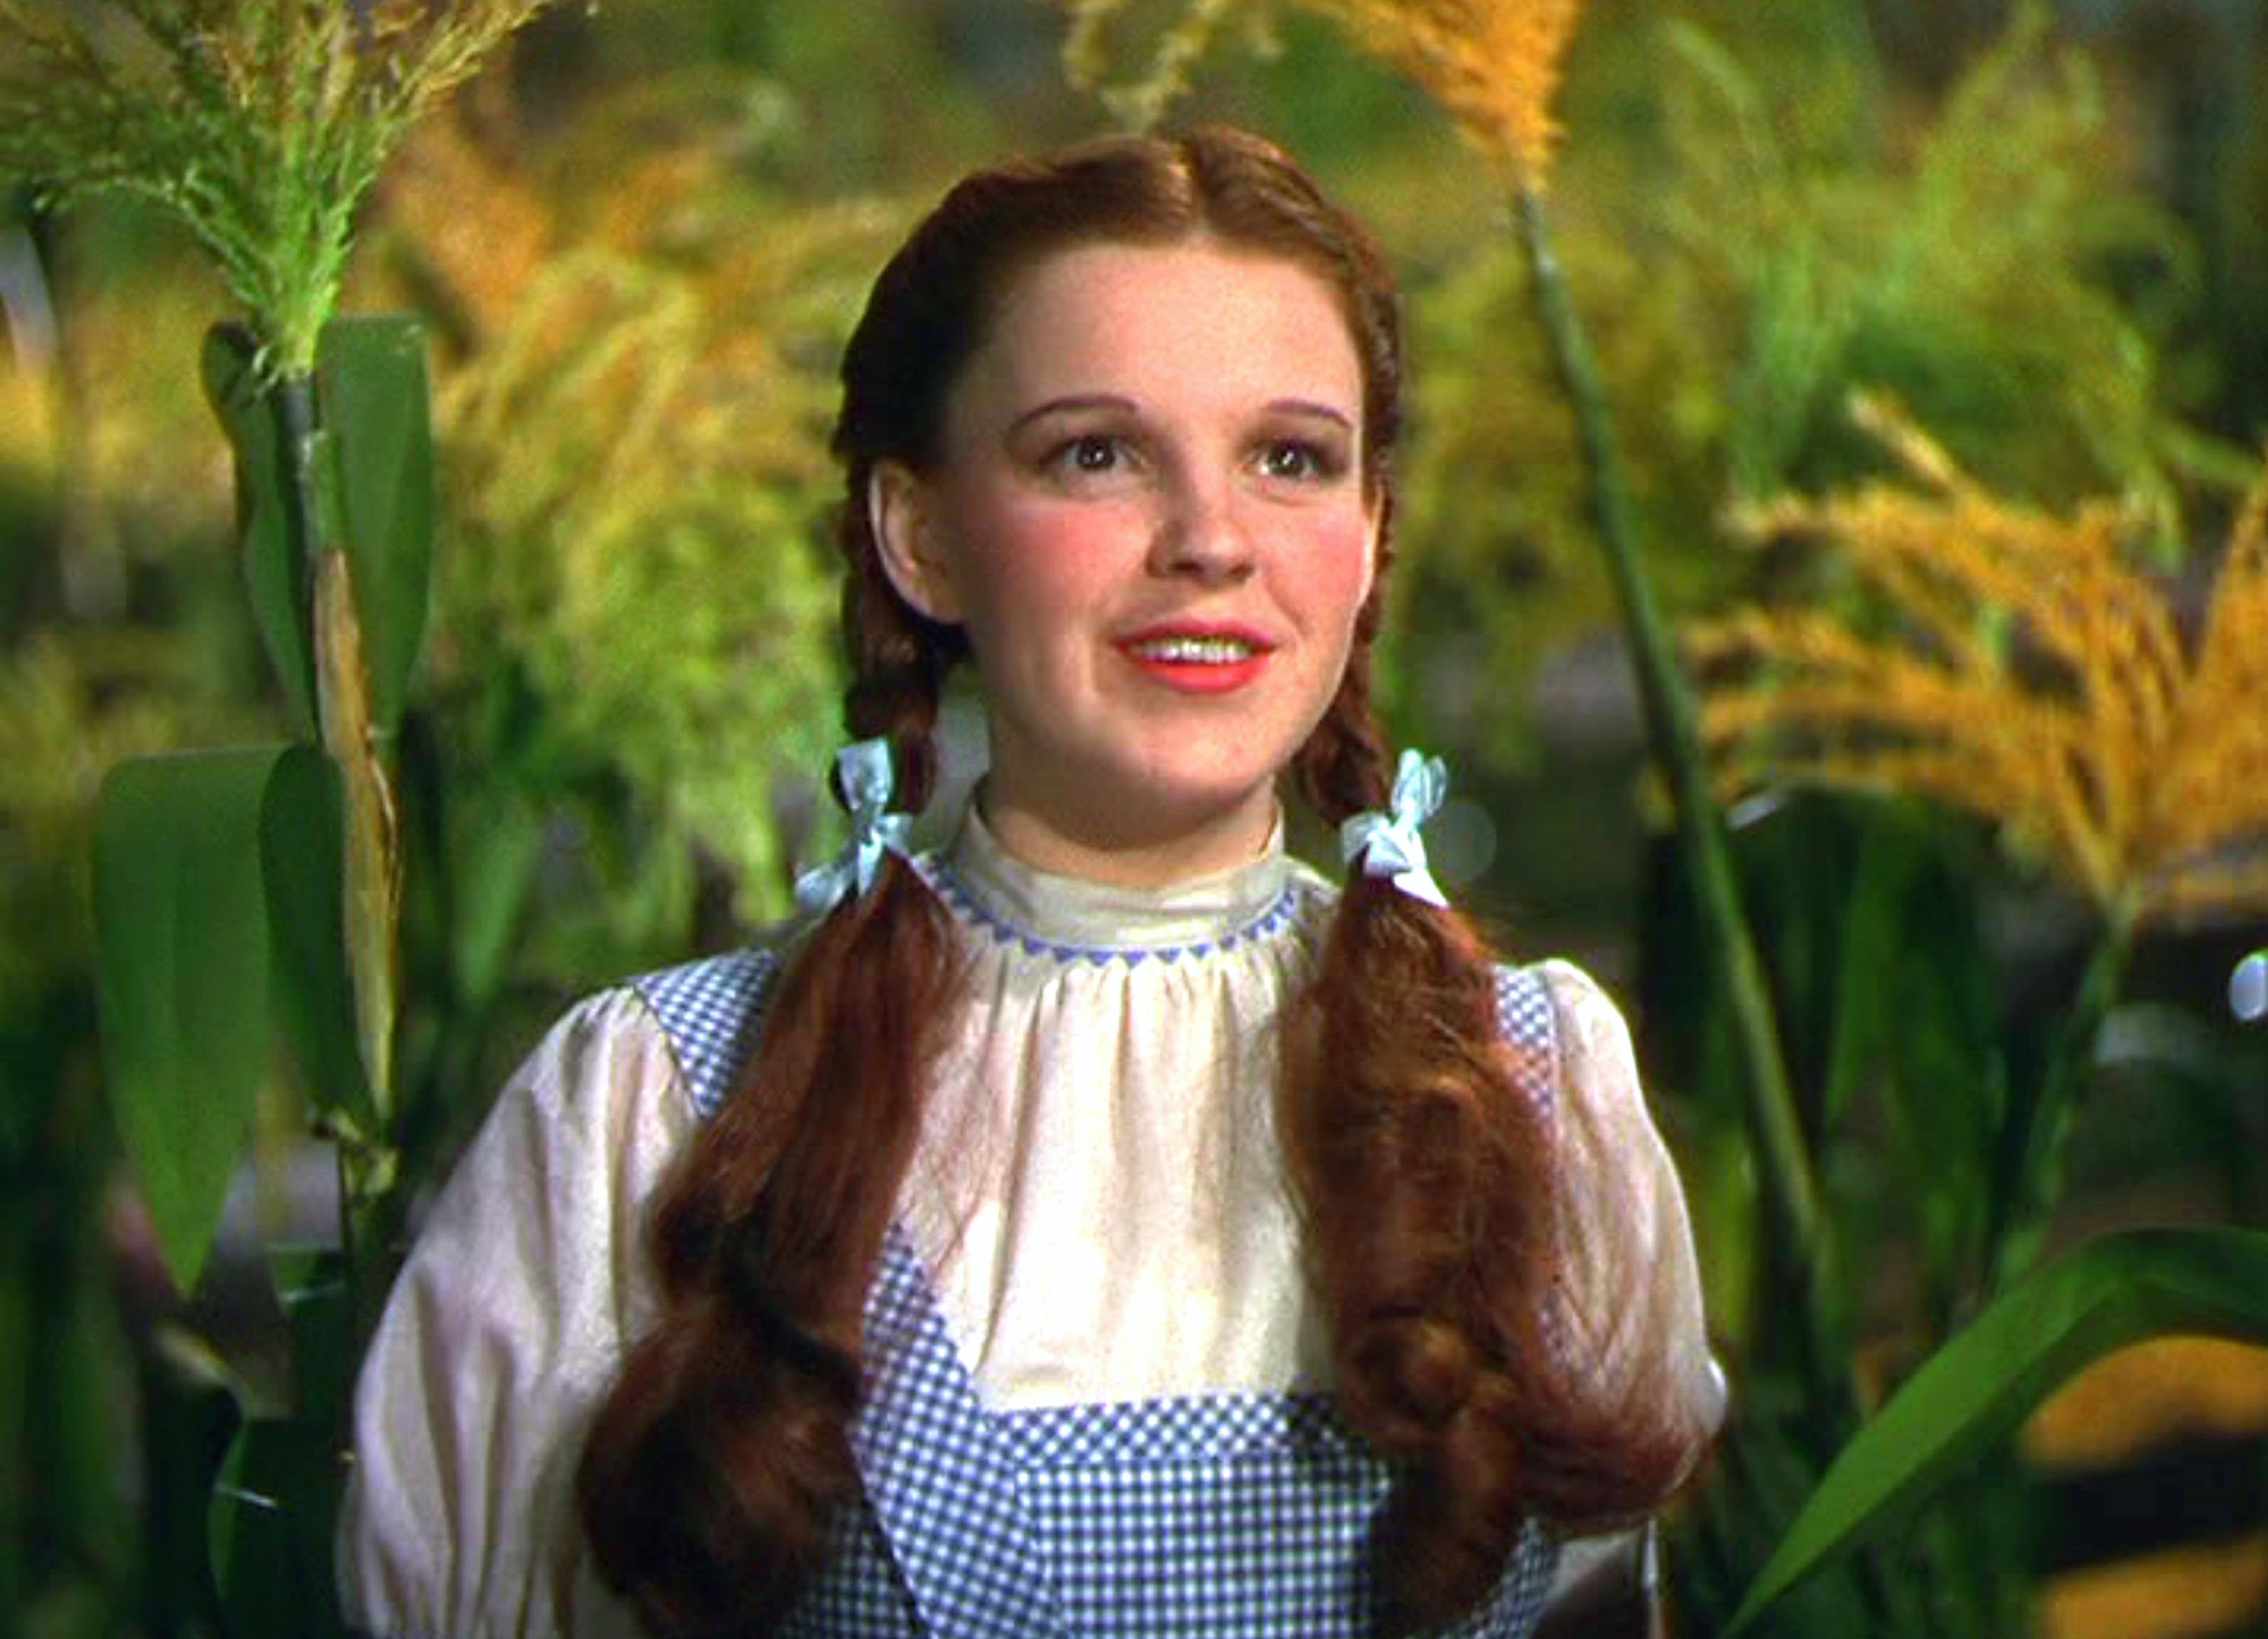 Judy Garland as Dorothy Gale in The Wizard of Oz